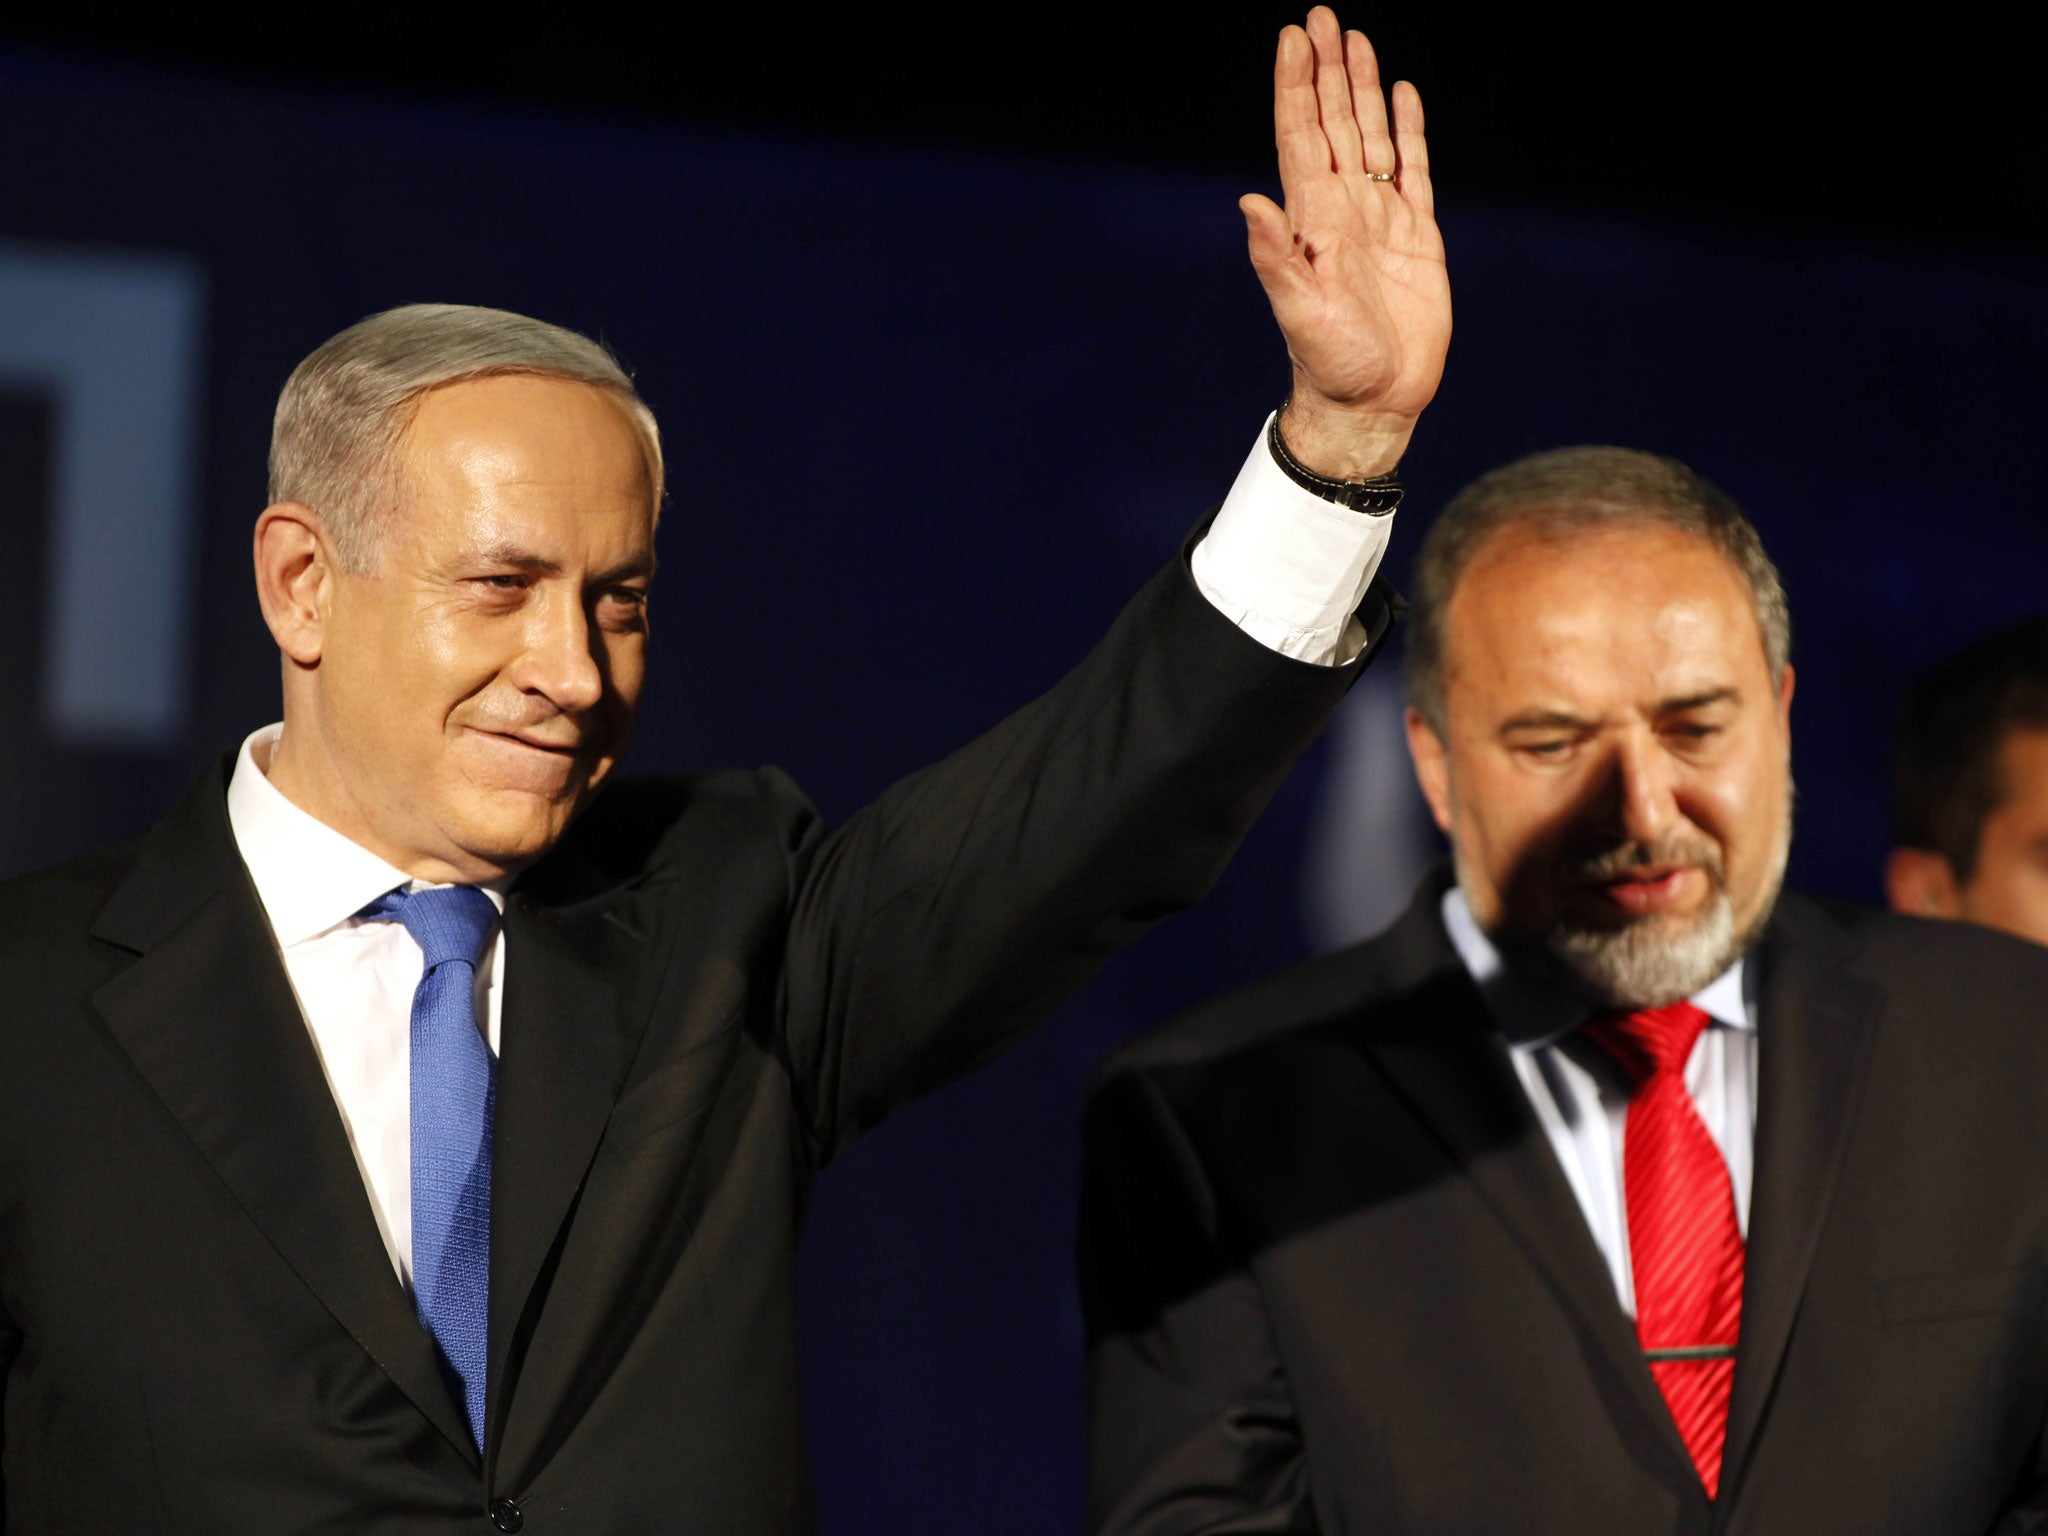 Israeli Prime Minister Benjamin Netanyahu (left) waves to supporters with Former Israel Minister for Foreign Affairs Avigdor Liberman